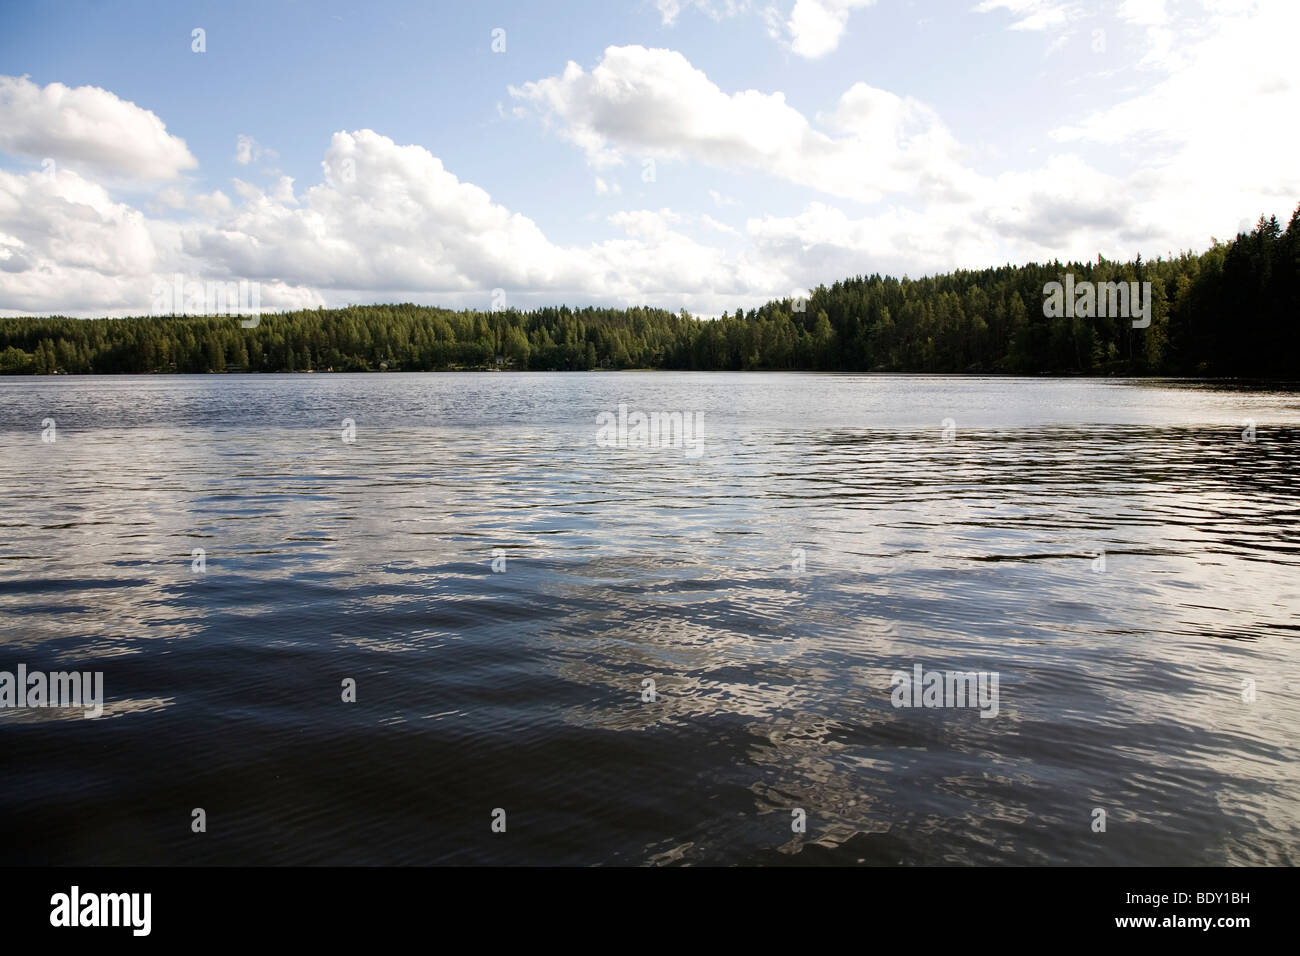 The pine tree fringed Lake Rautavasi, close to the town of Vammala in the Tampere Region of Finland. Stock Photo